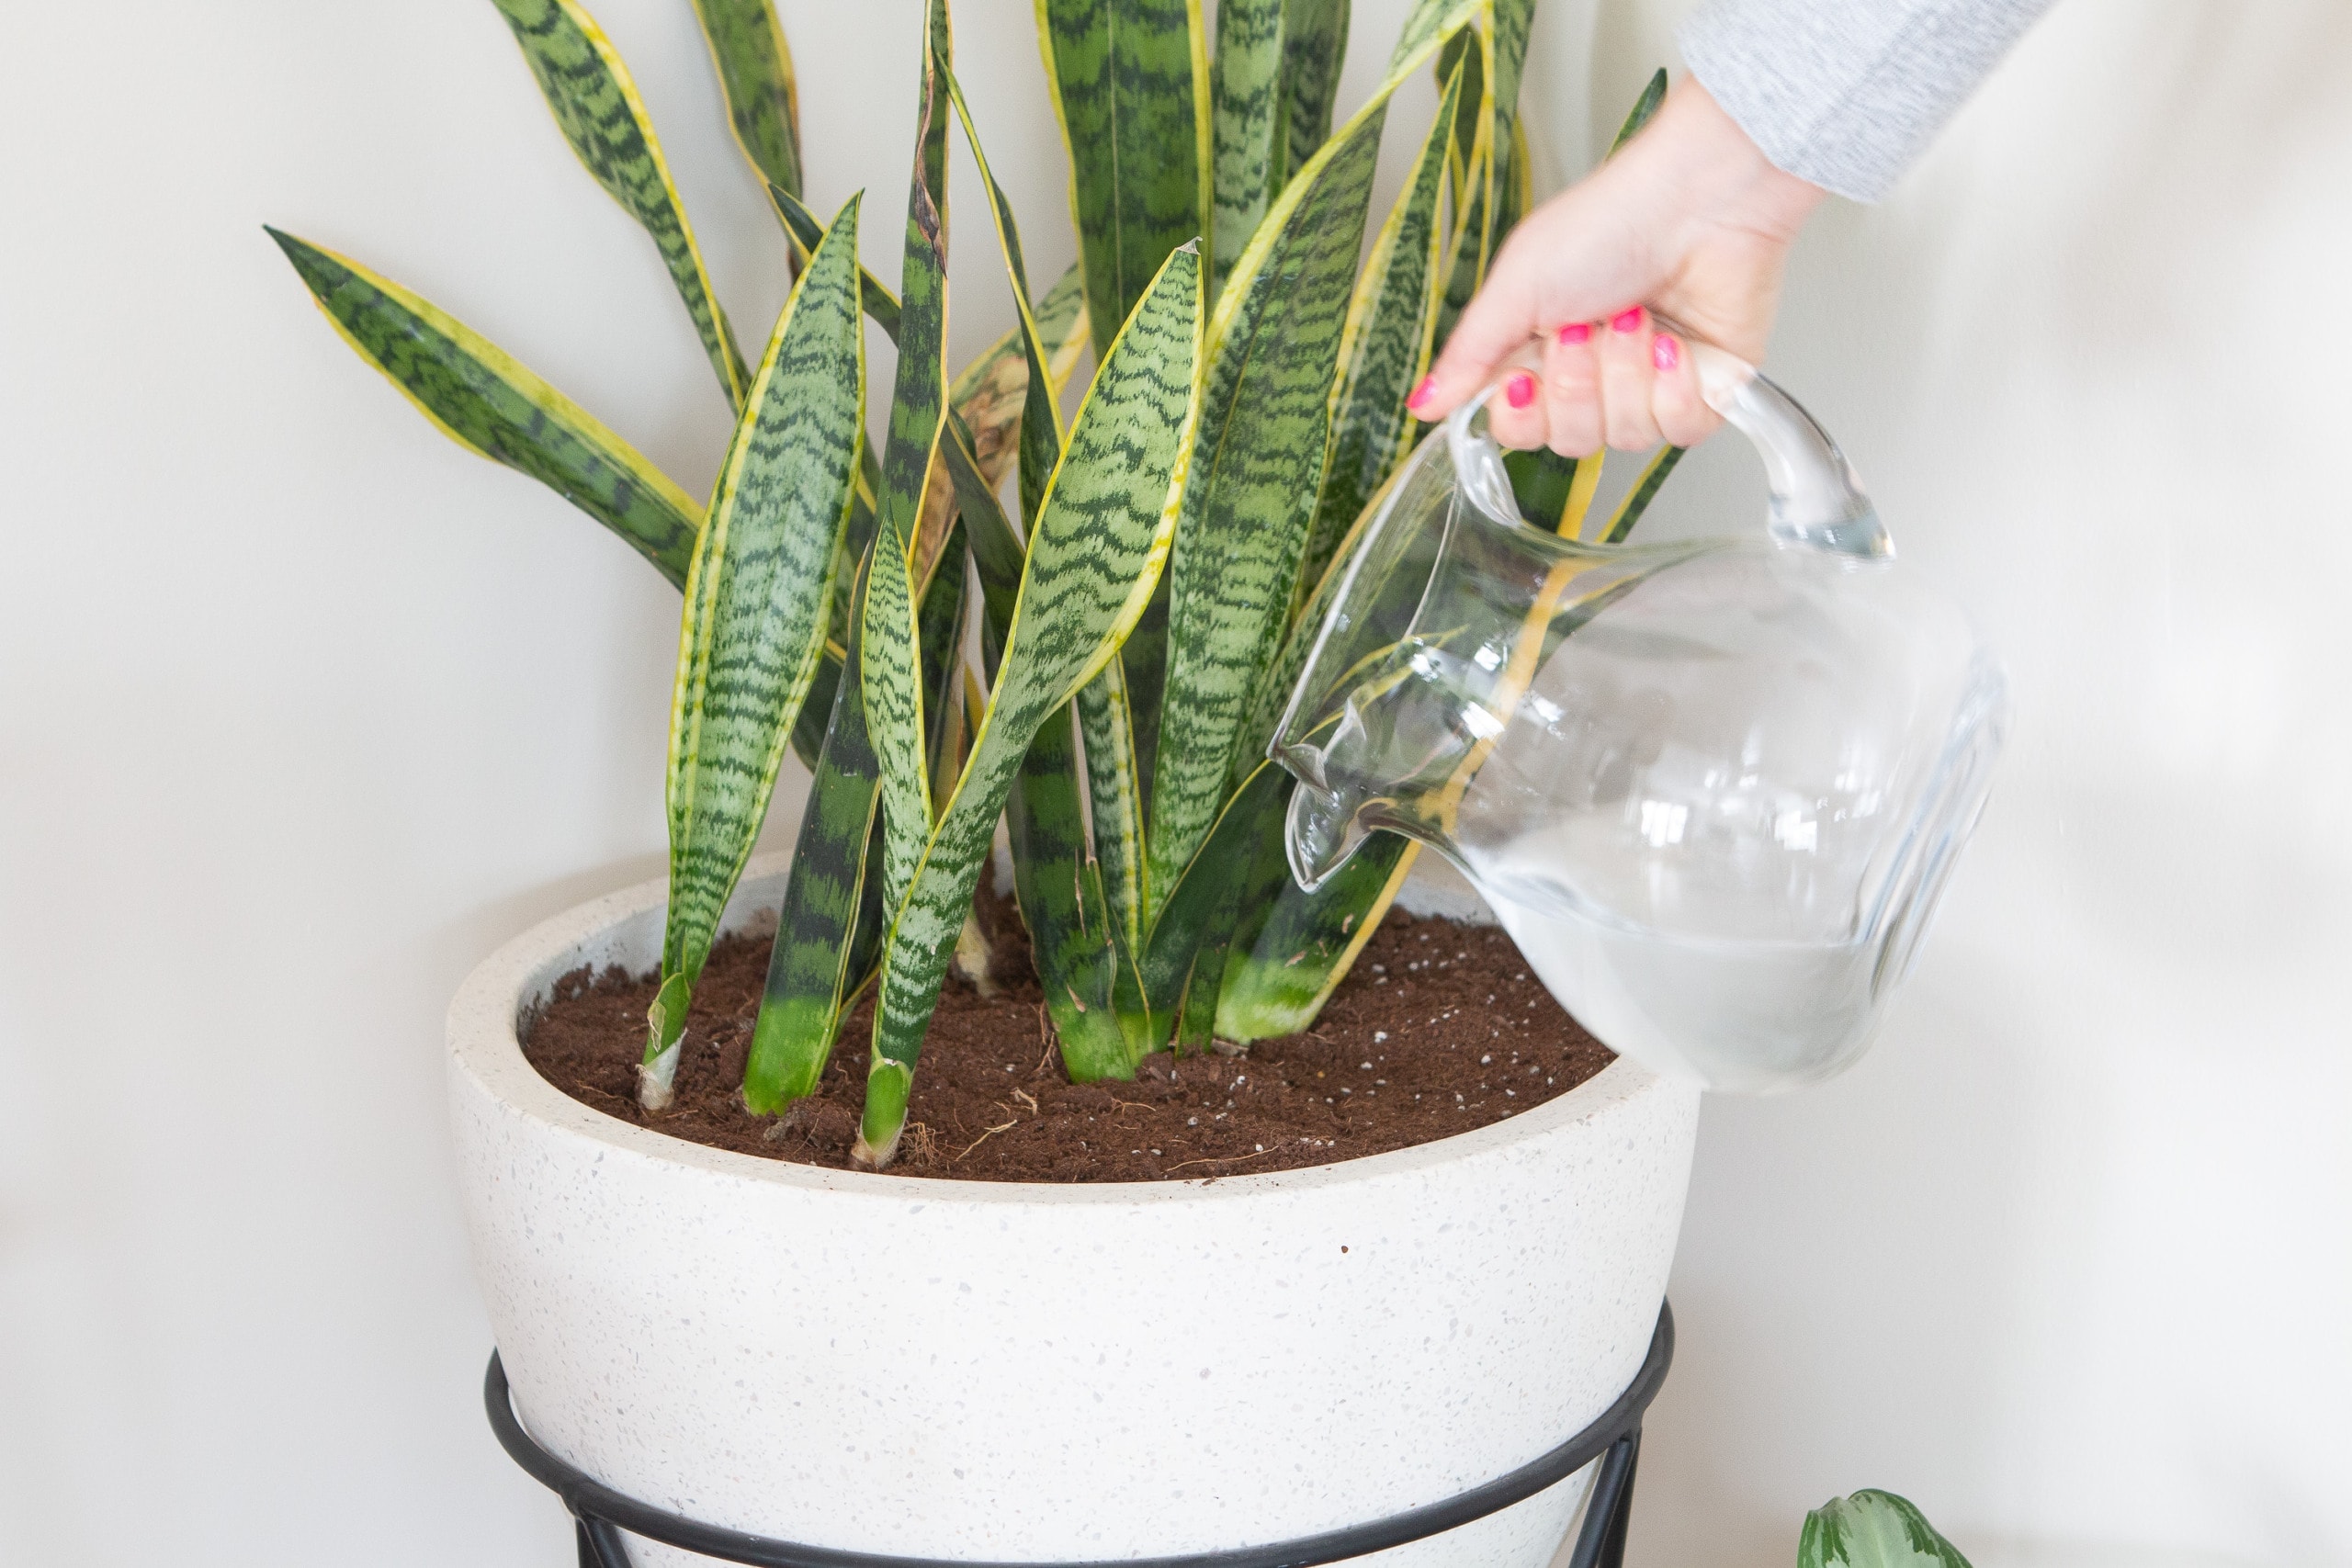 Water your indoor plants once a week to prep for the week ahead